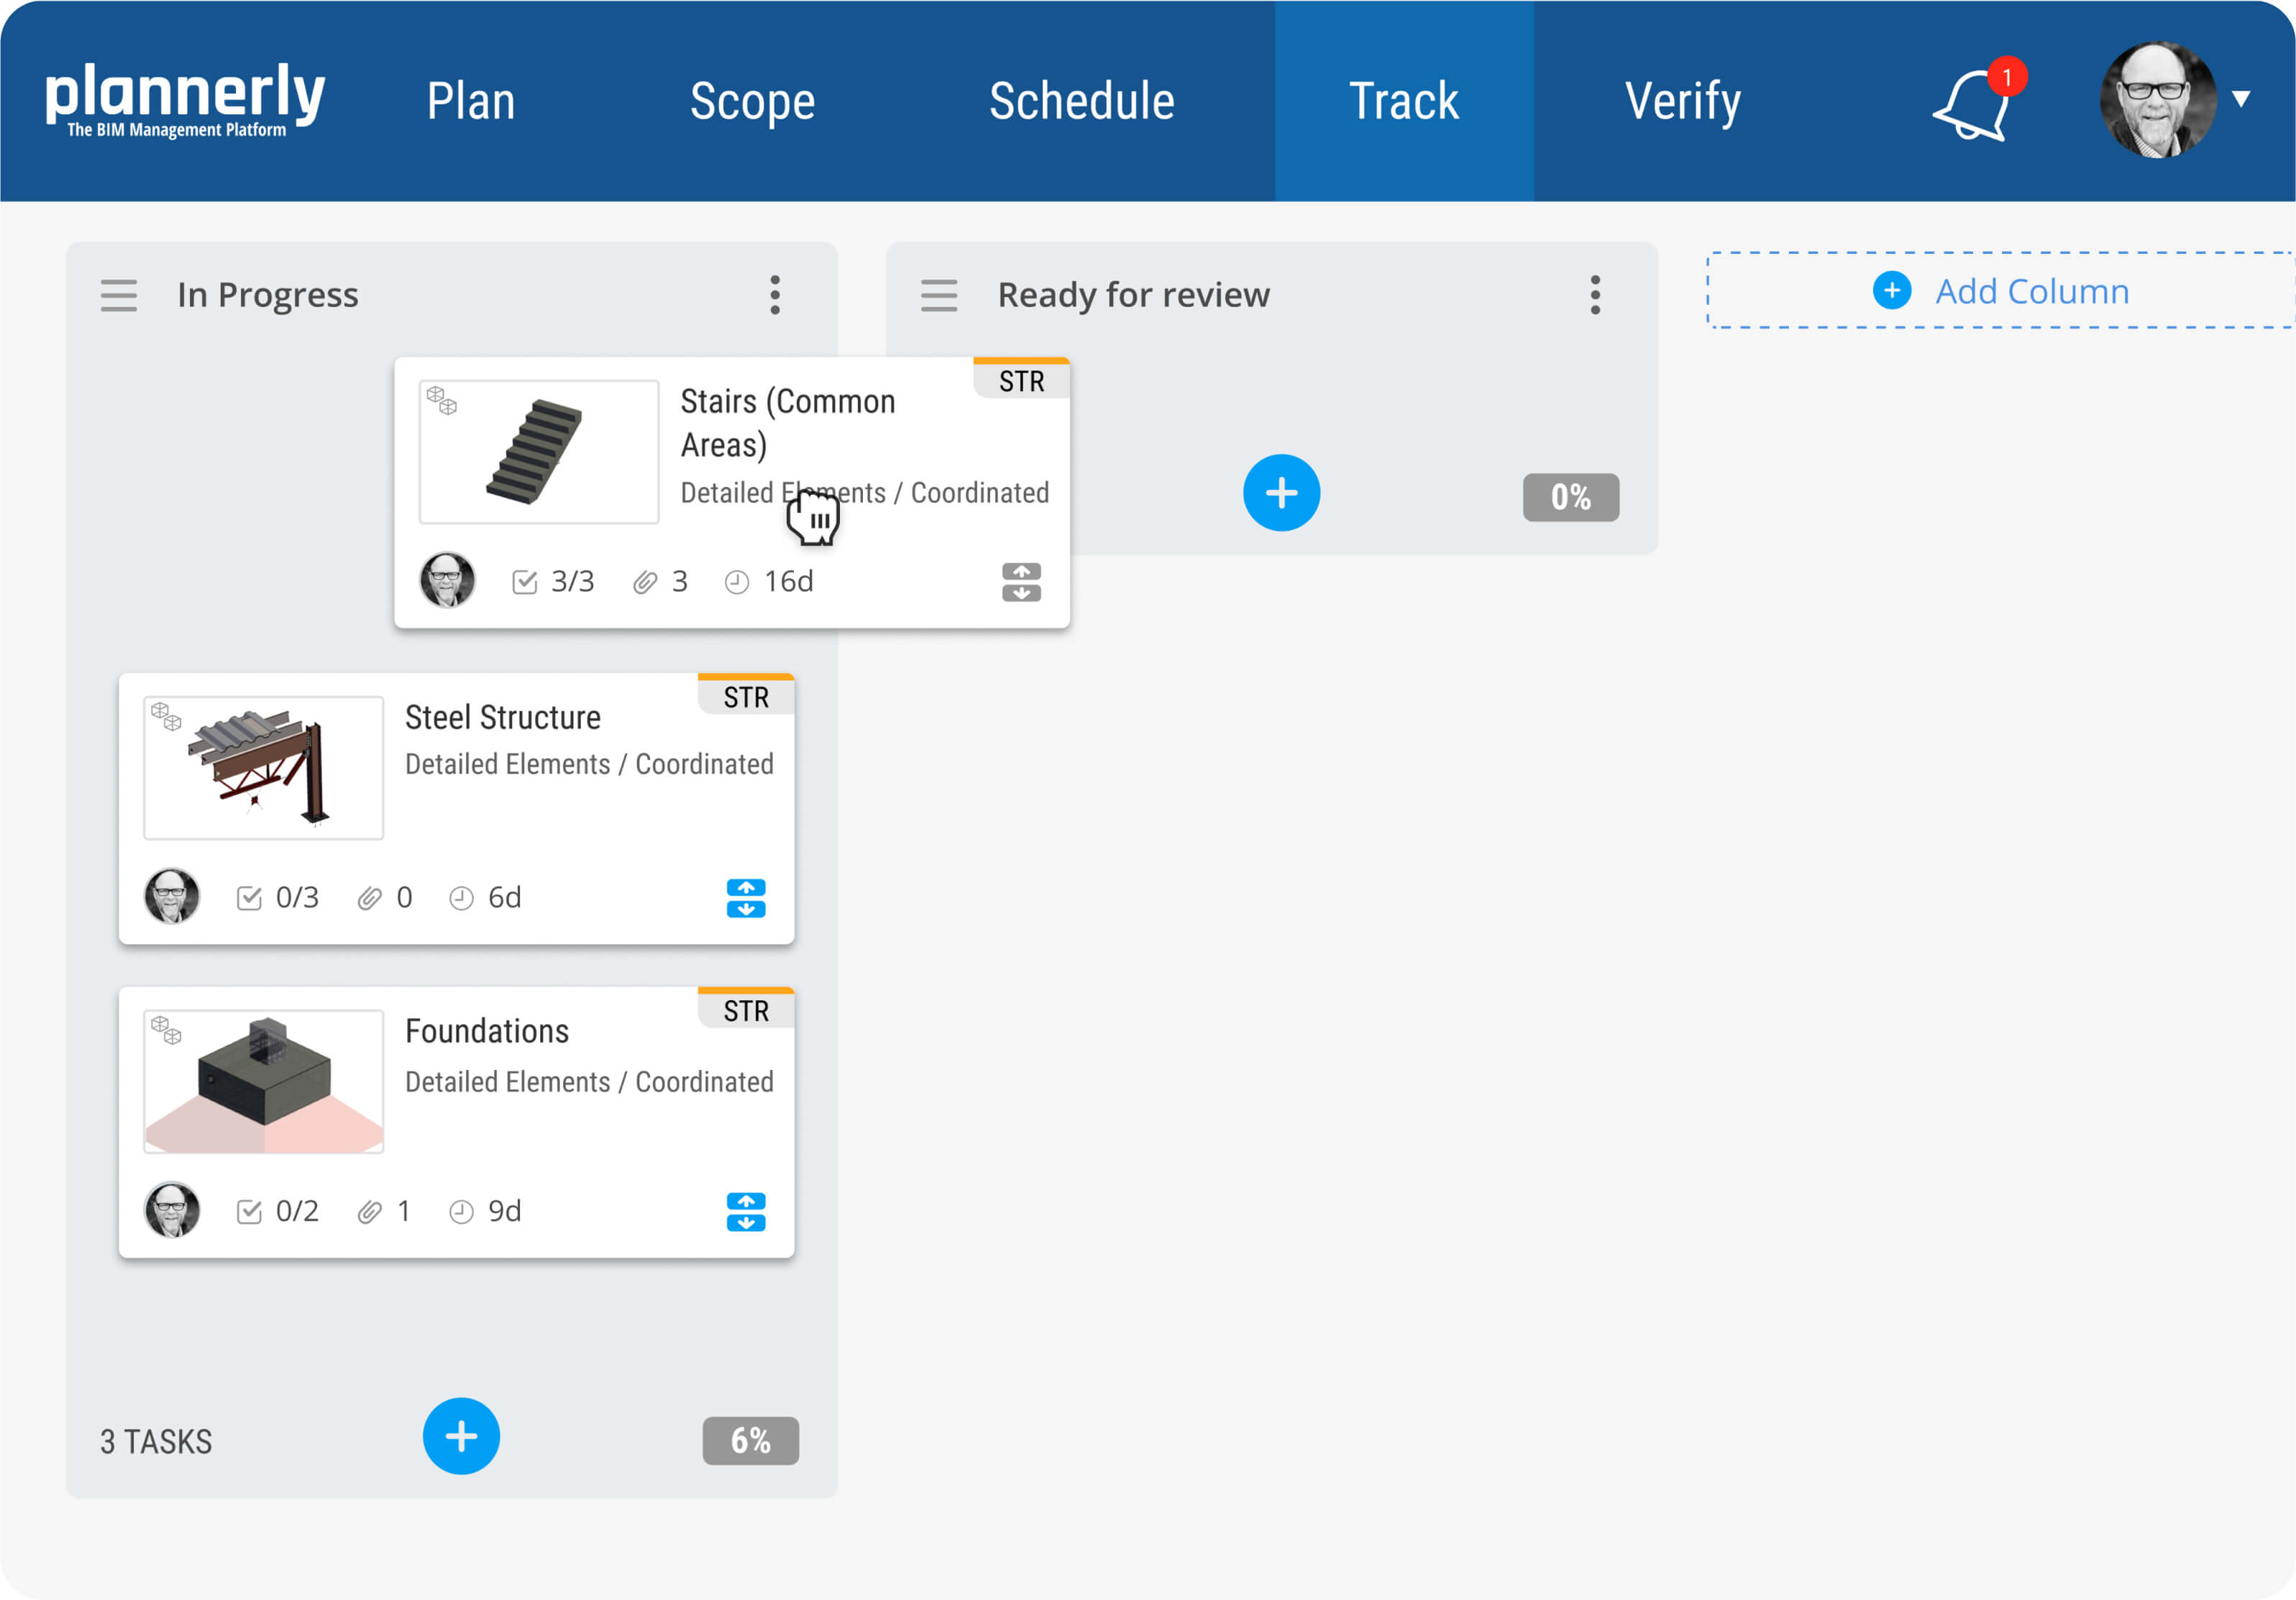 Plannerly - Track Module - for simple BIM project updates